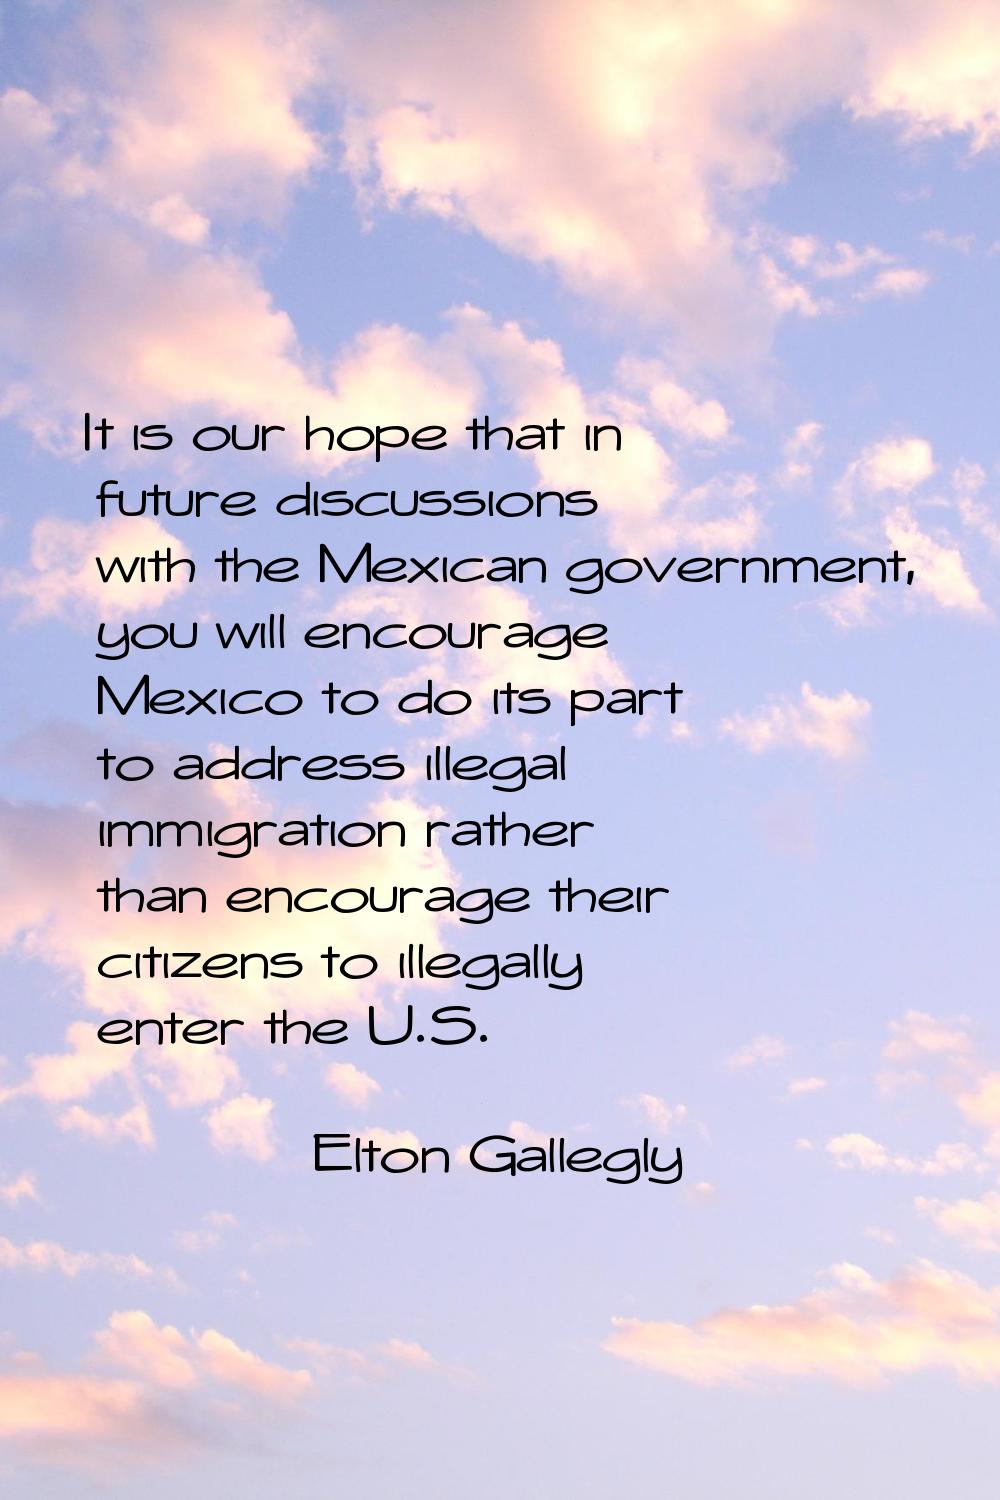 It is our hope that in future discussions with the Mexican government, you will encourage Mexico to